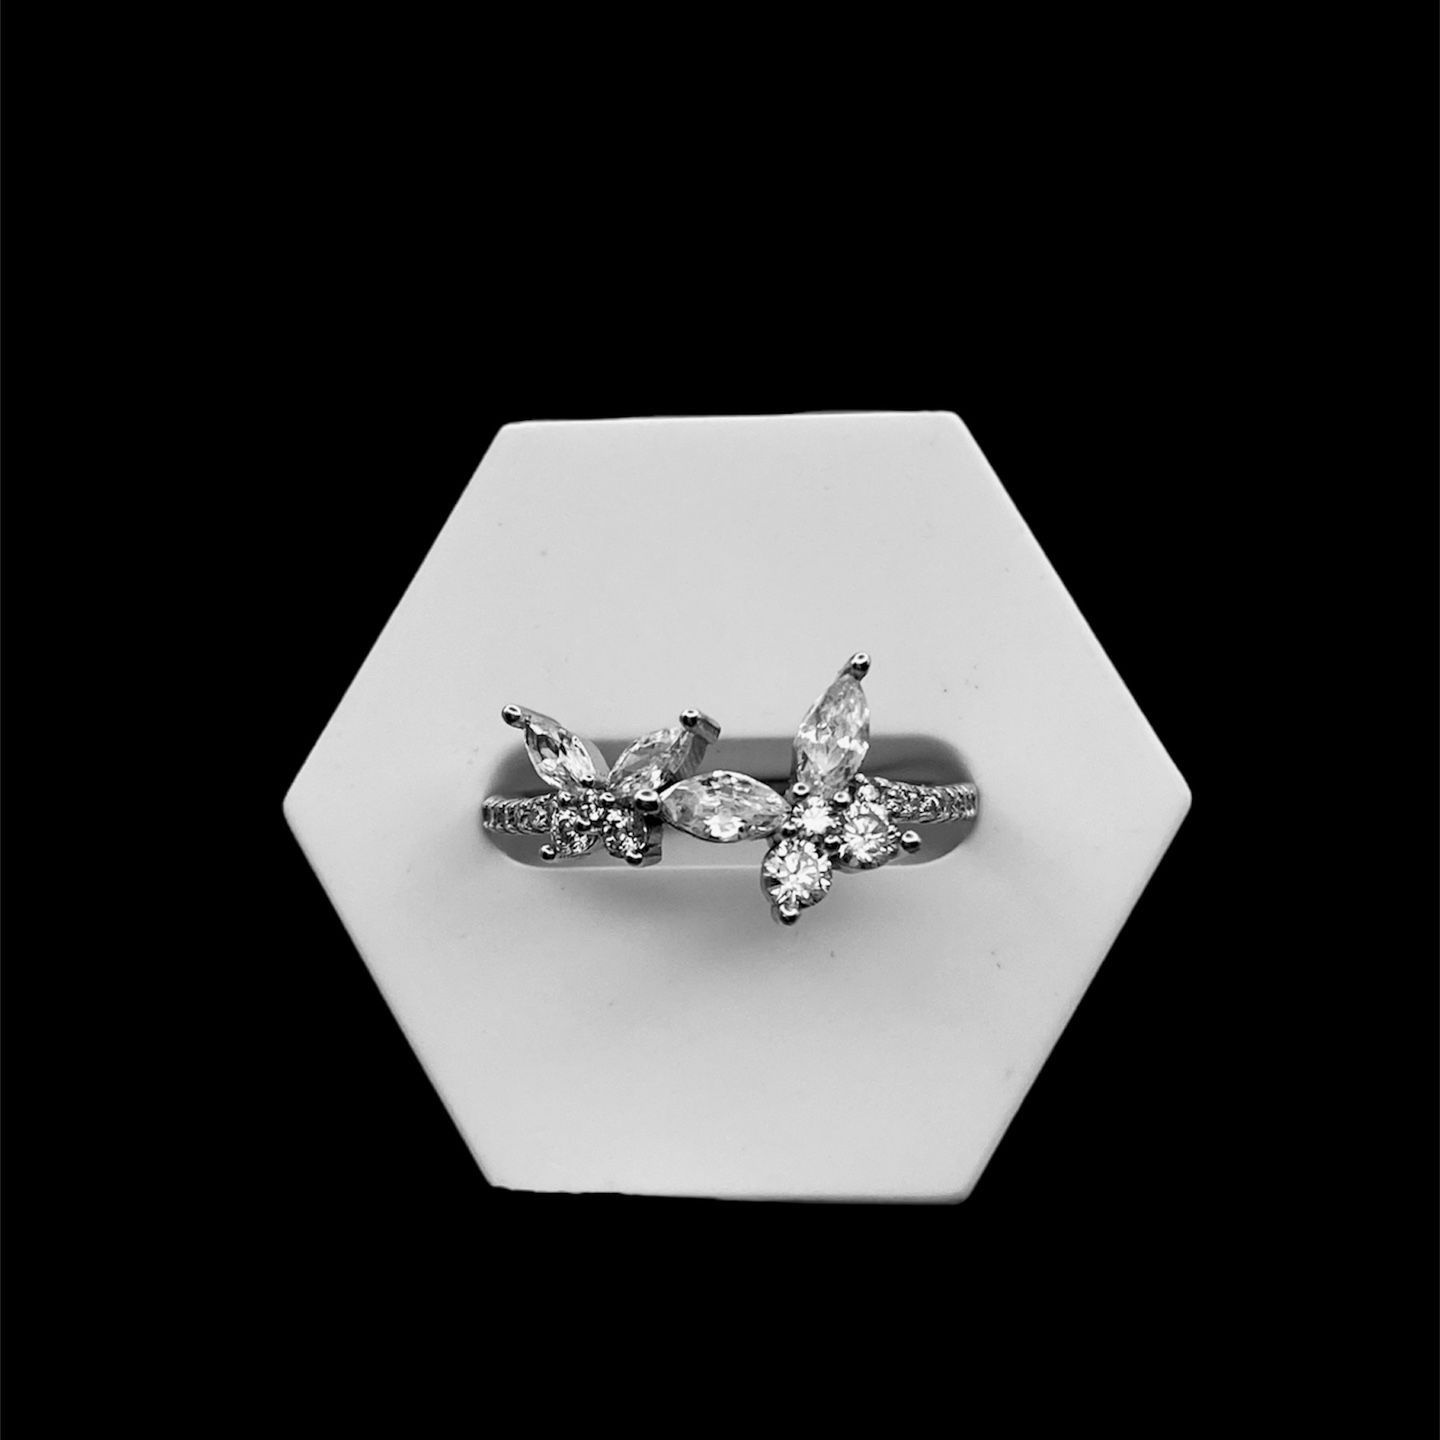 Butterfly Ring 925Sterling Silver Ring  Sizes 6-7  Women’s Ring Gift Idea 